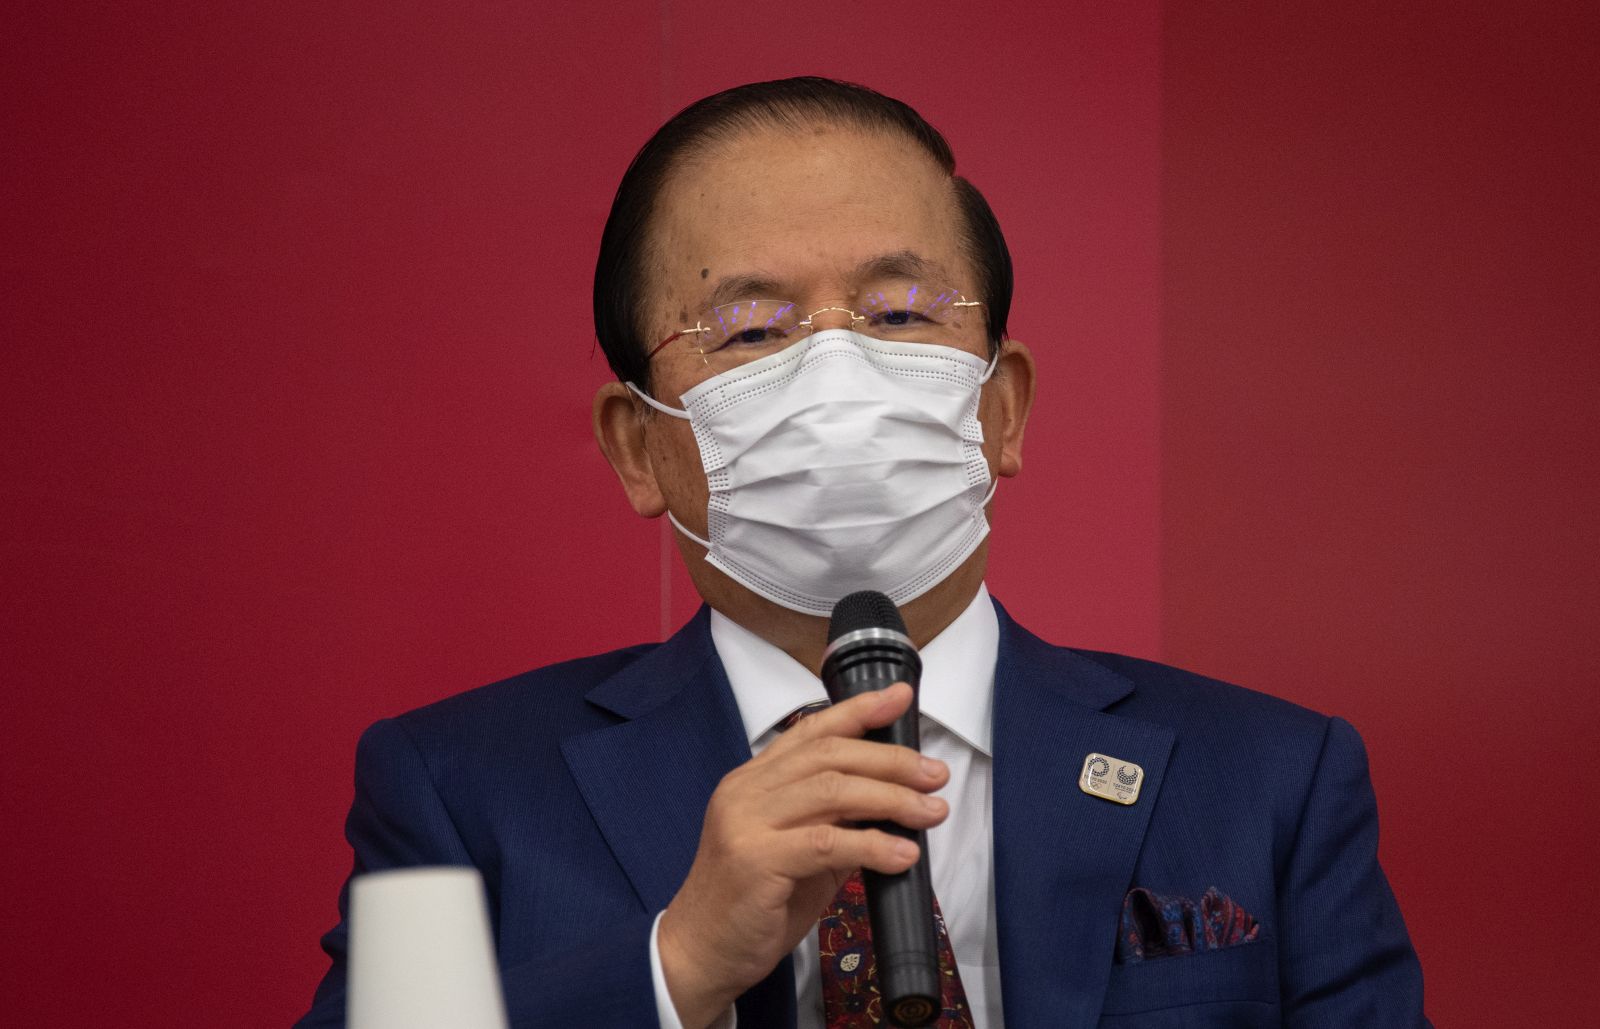 epa08899001 Tokyo 2020 Olympic Games CEO Toshiro Muto wears a face mask as he speaks during a press conference following a Tokyo2020 Olympics Executive Board meeting in Tokyo, Japan, 22 December 2020.  EPA/Carl Court / POOL